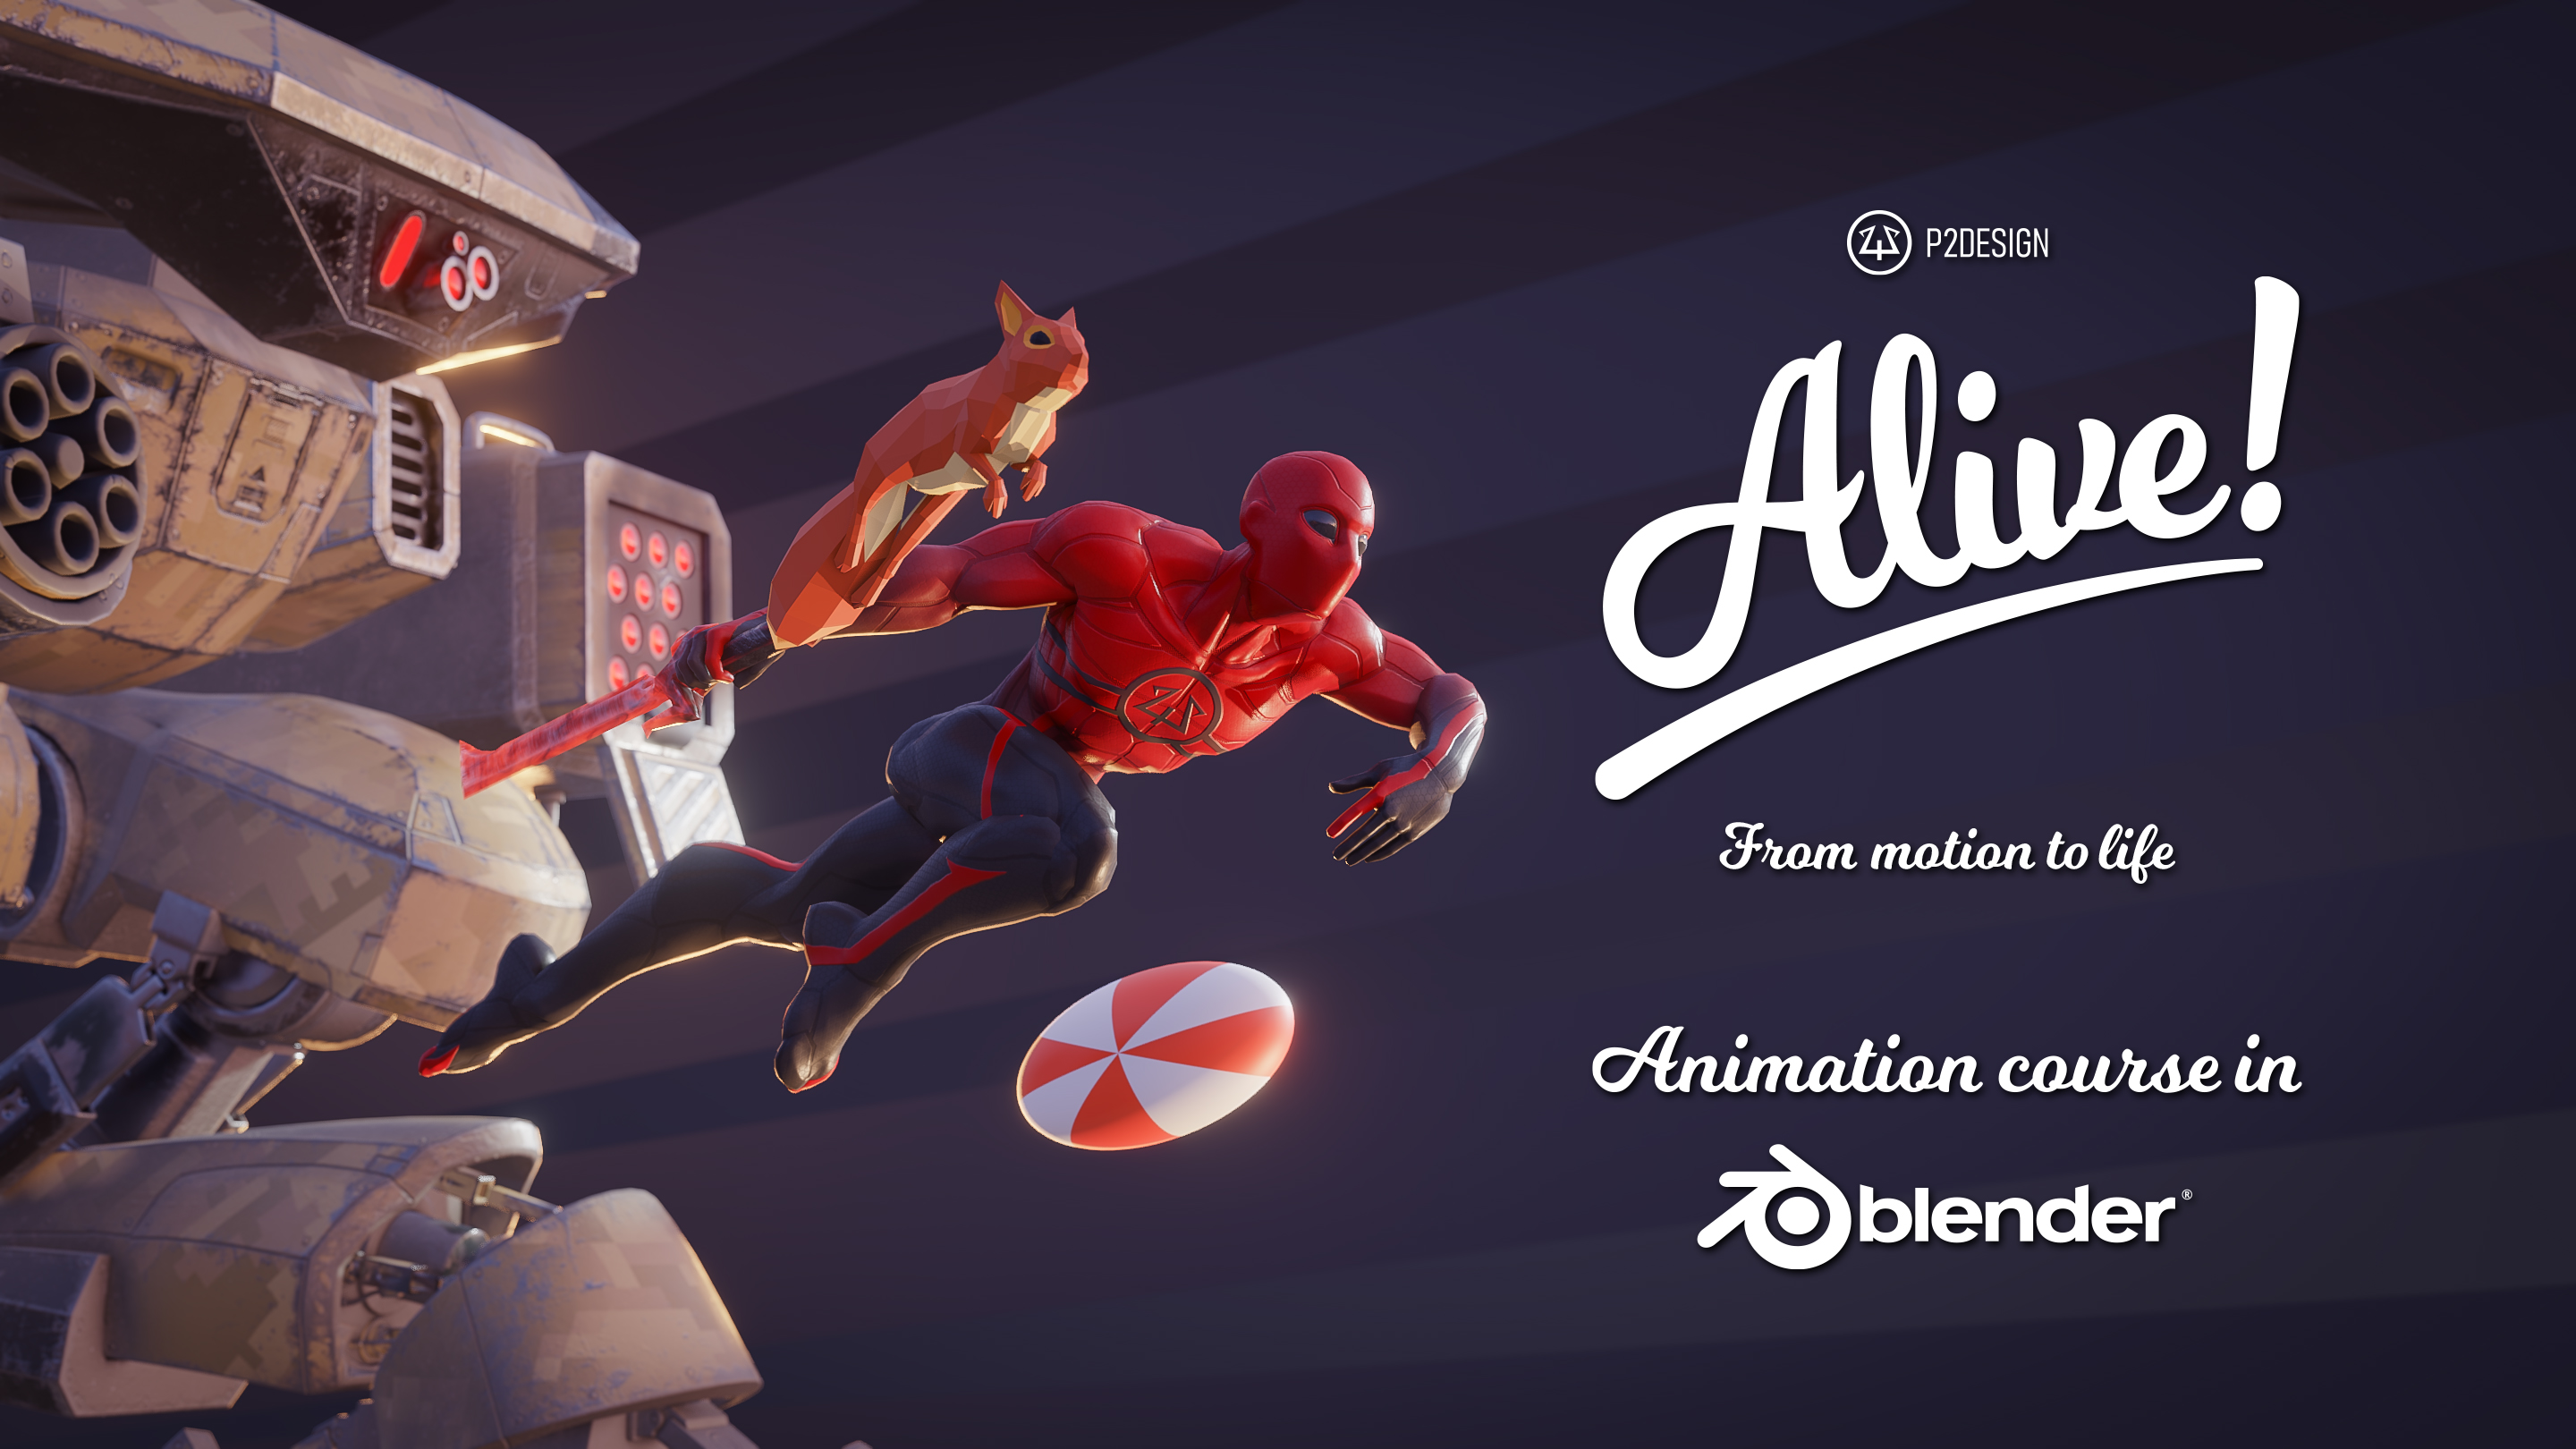 Alive! animation course in Blender | P2design academy